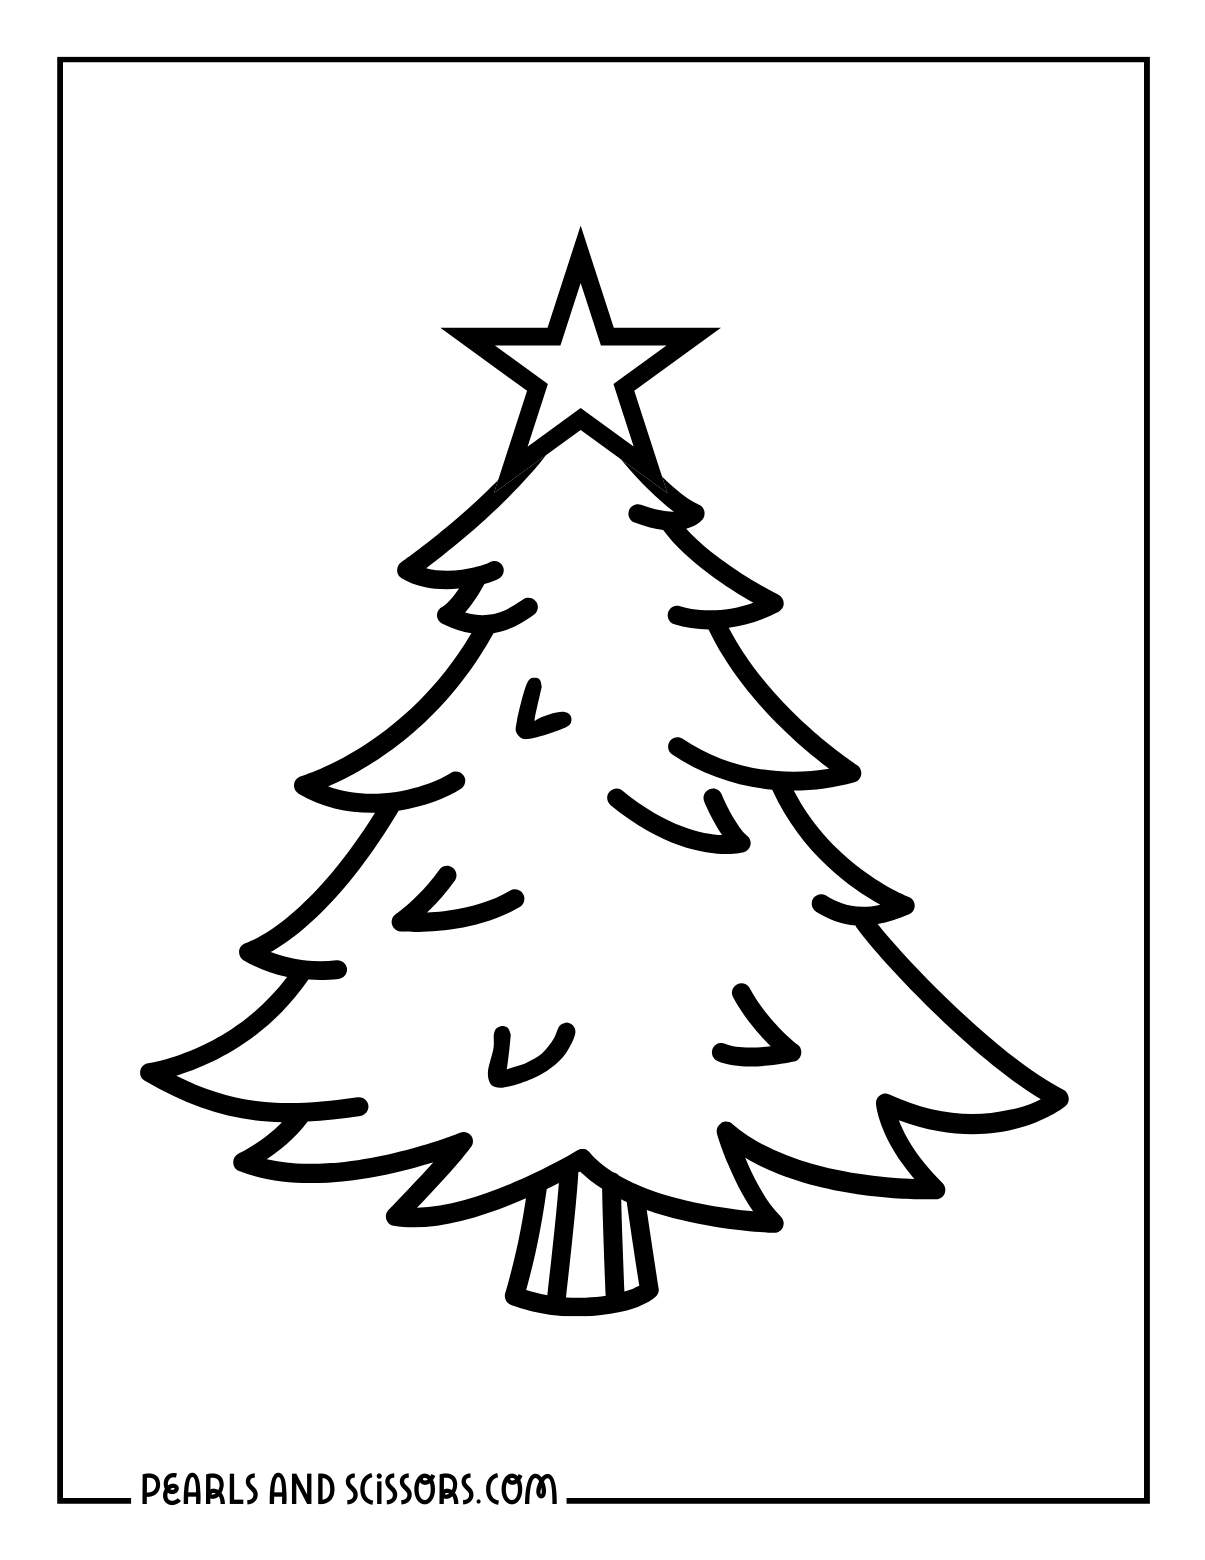 Simple outline of a christmas tree to color in for kids.